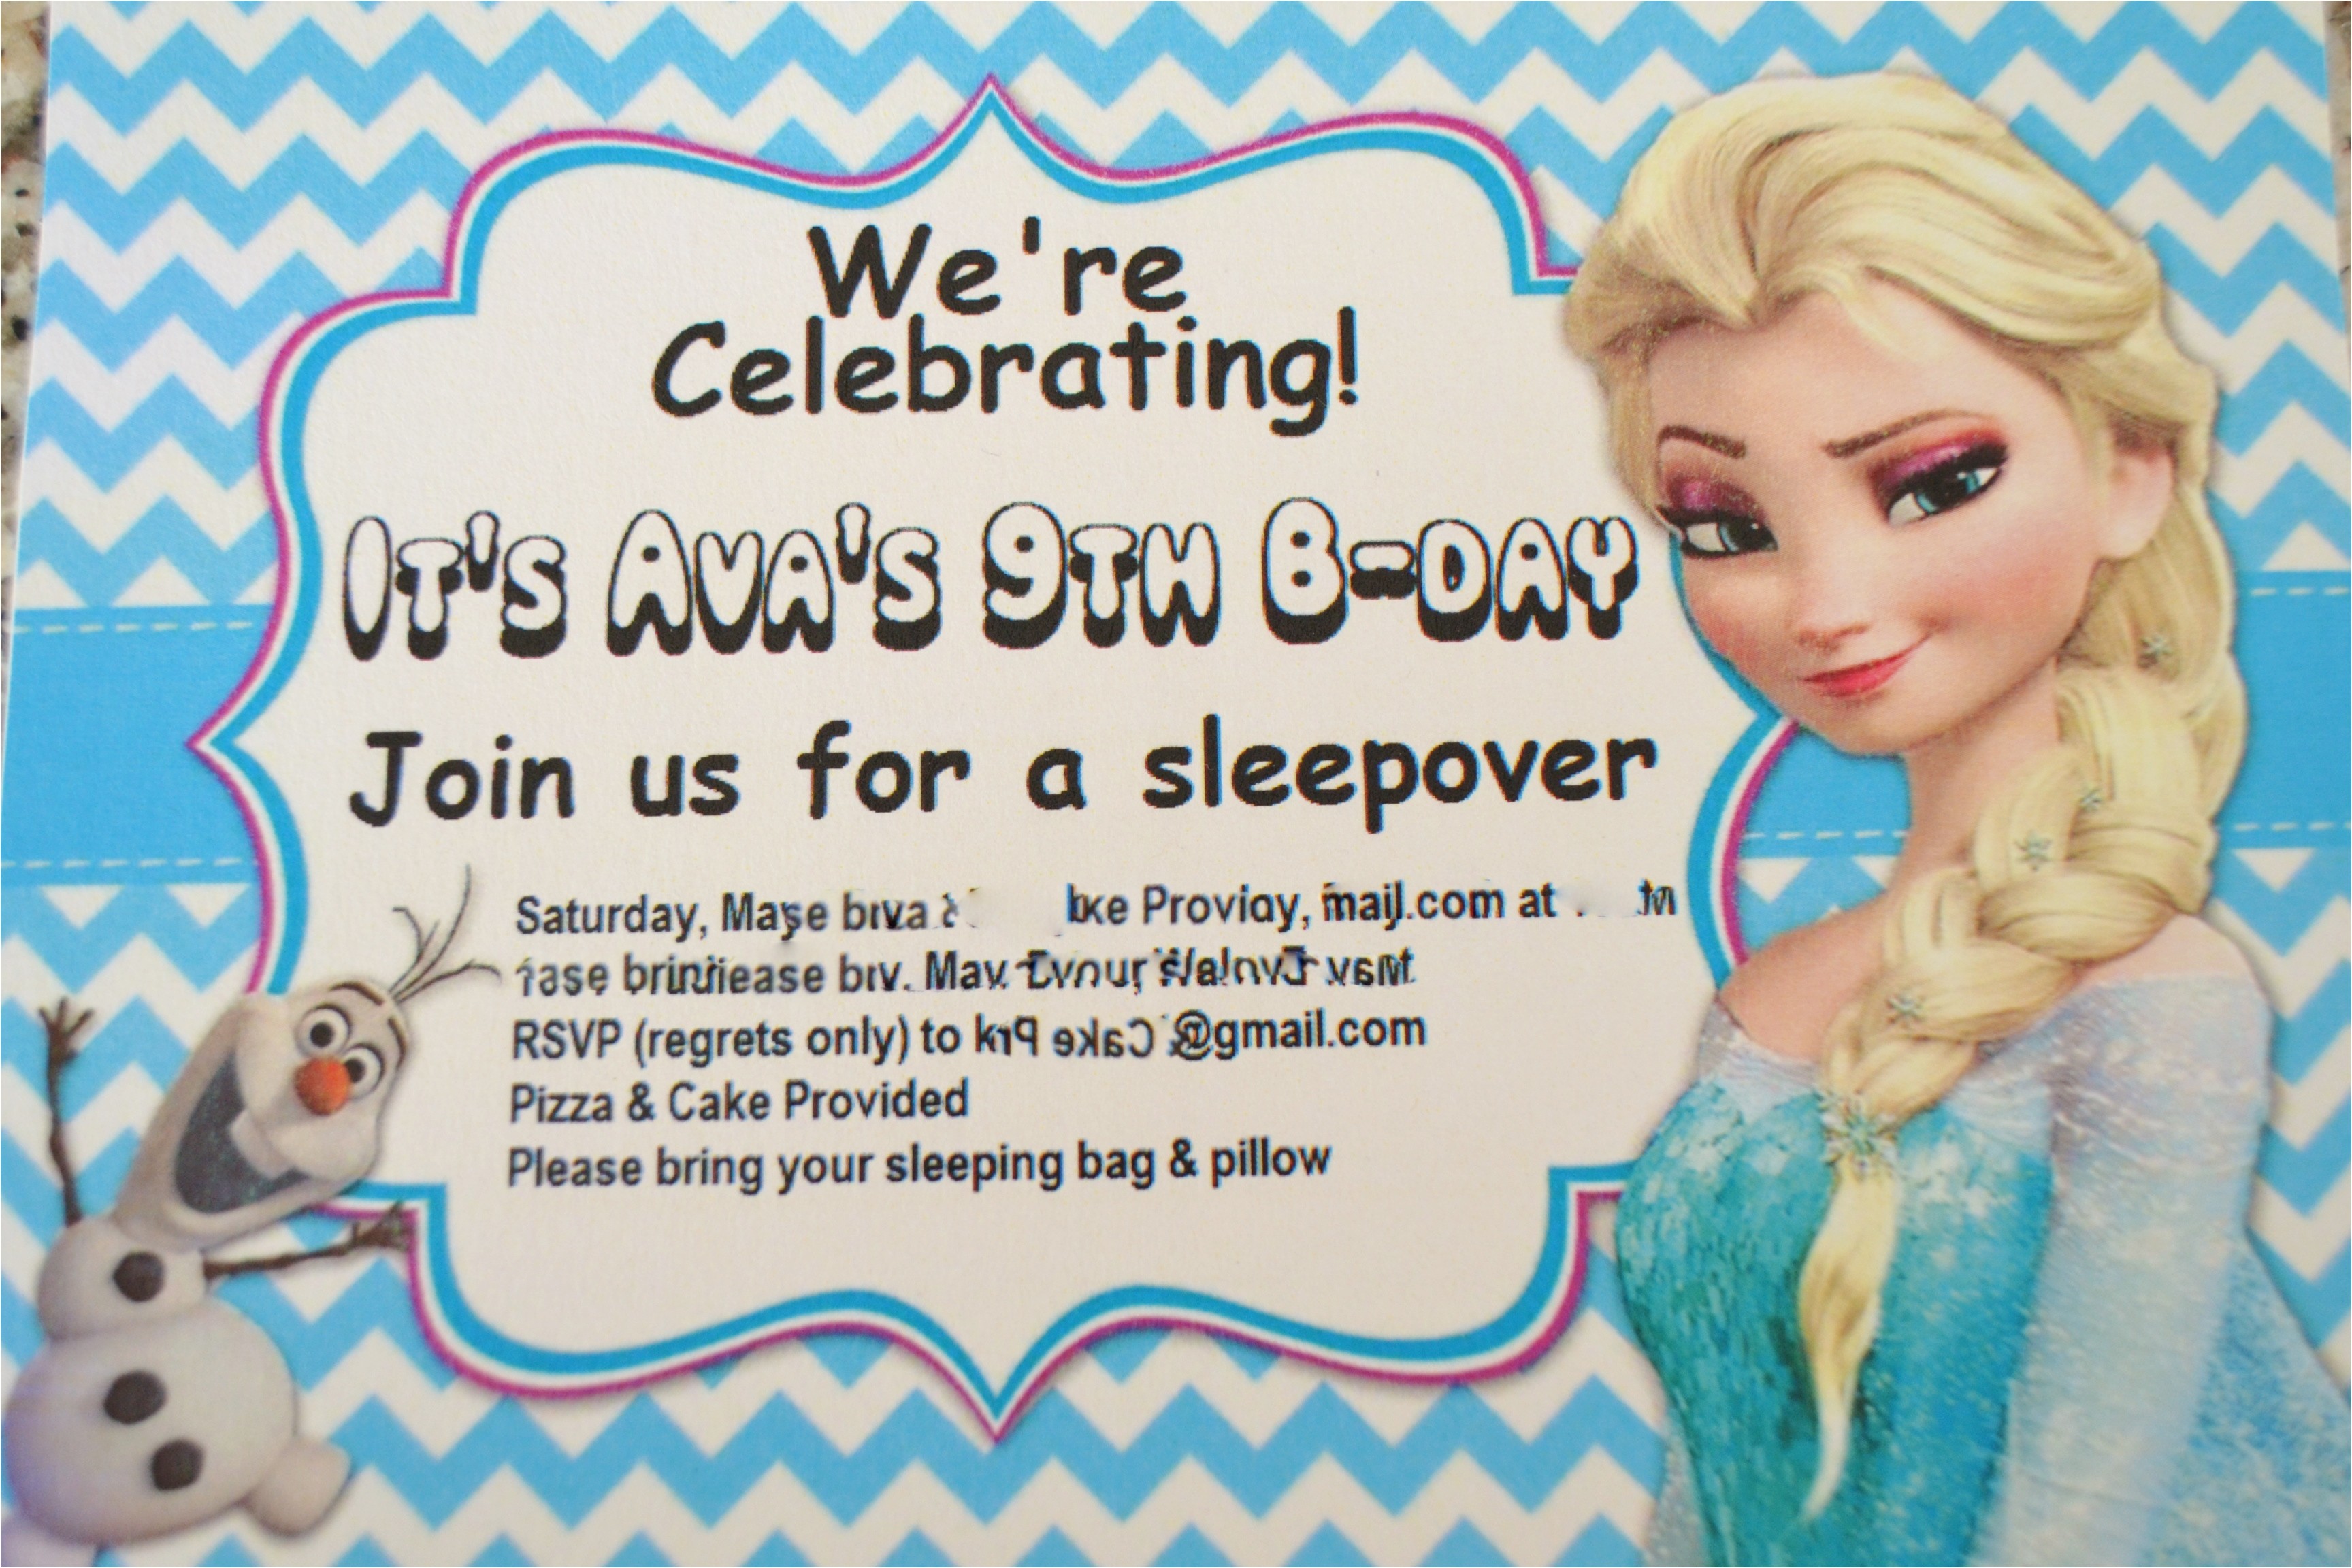 breathtaking party city birthday invitations you must see